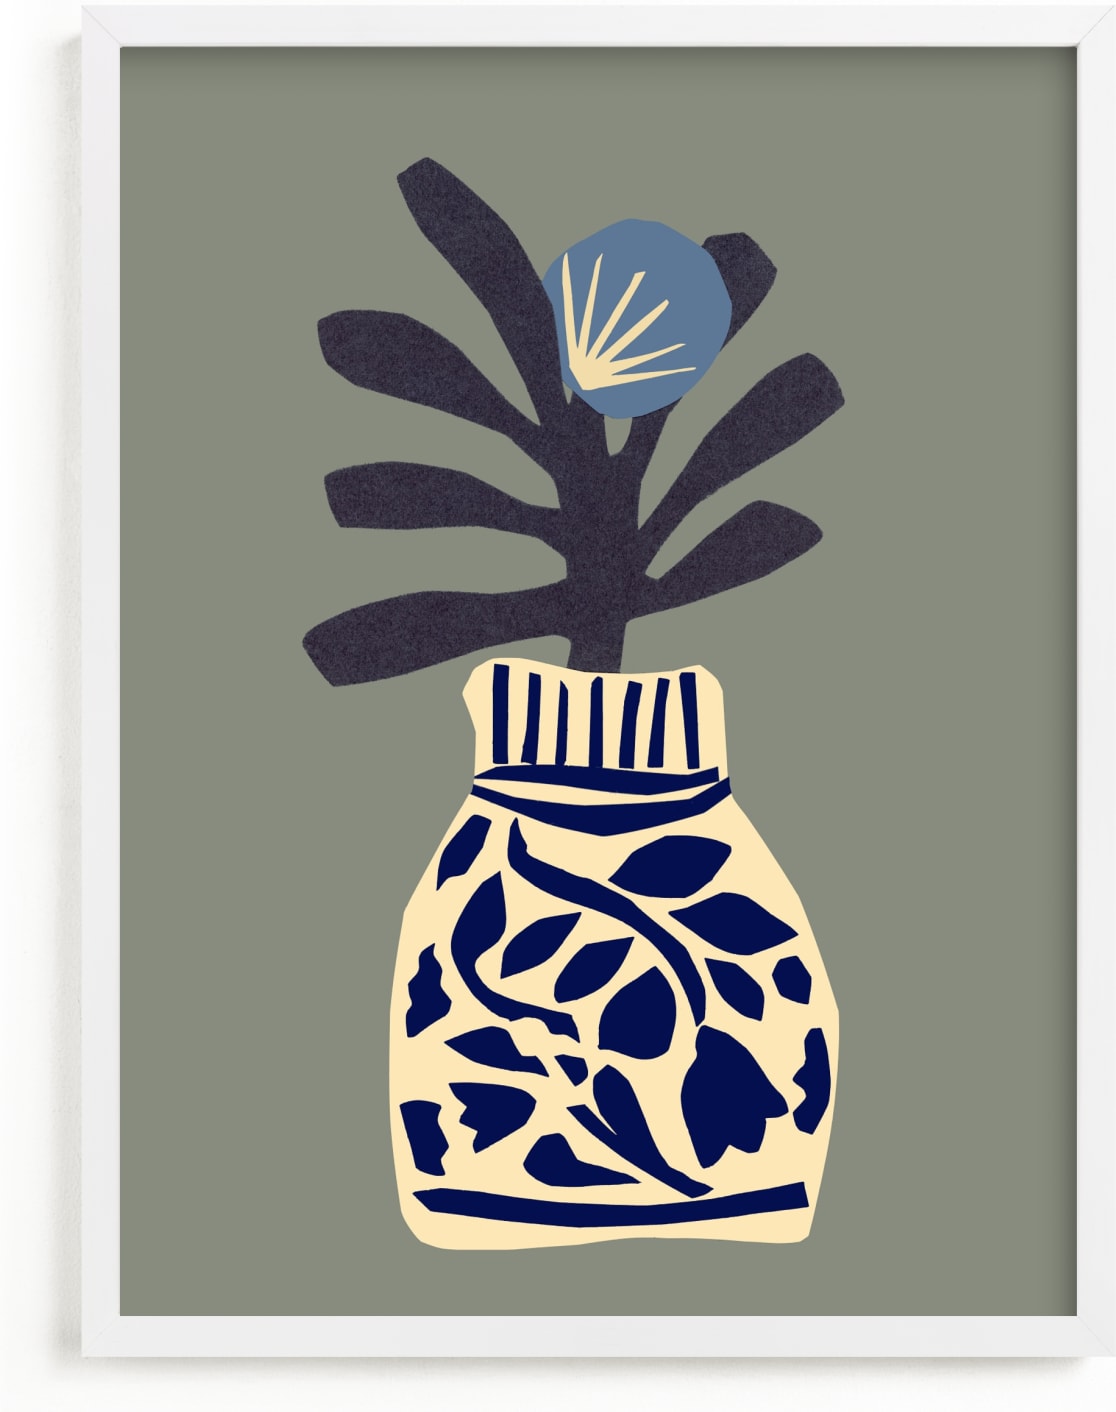 This is a blue art by Sonya Percival called Single flower in a porcelain vase.